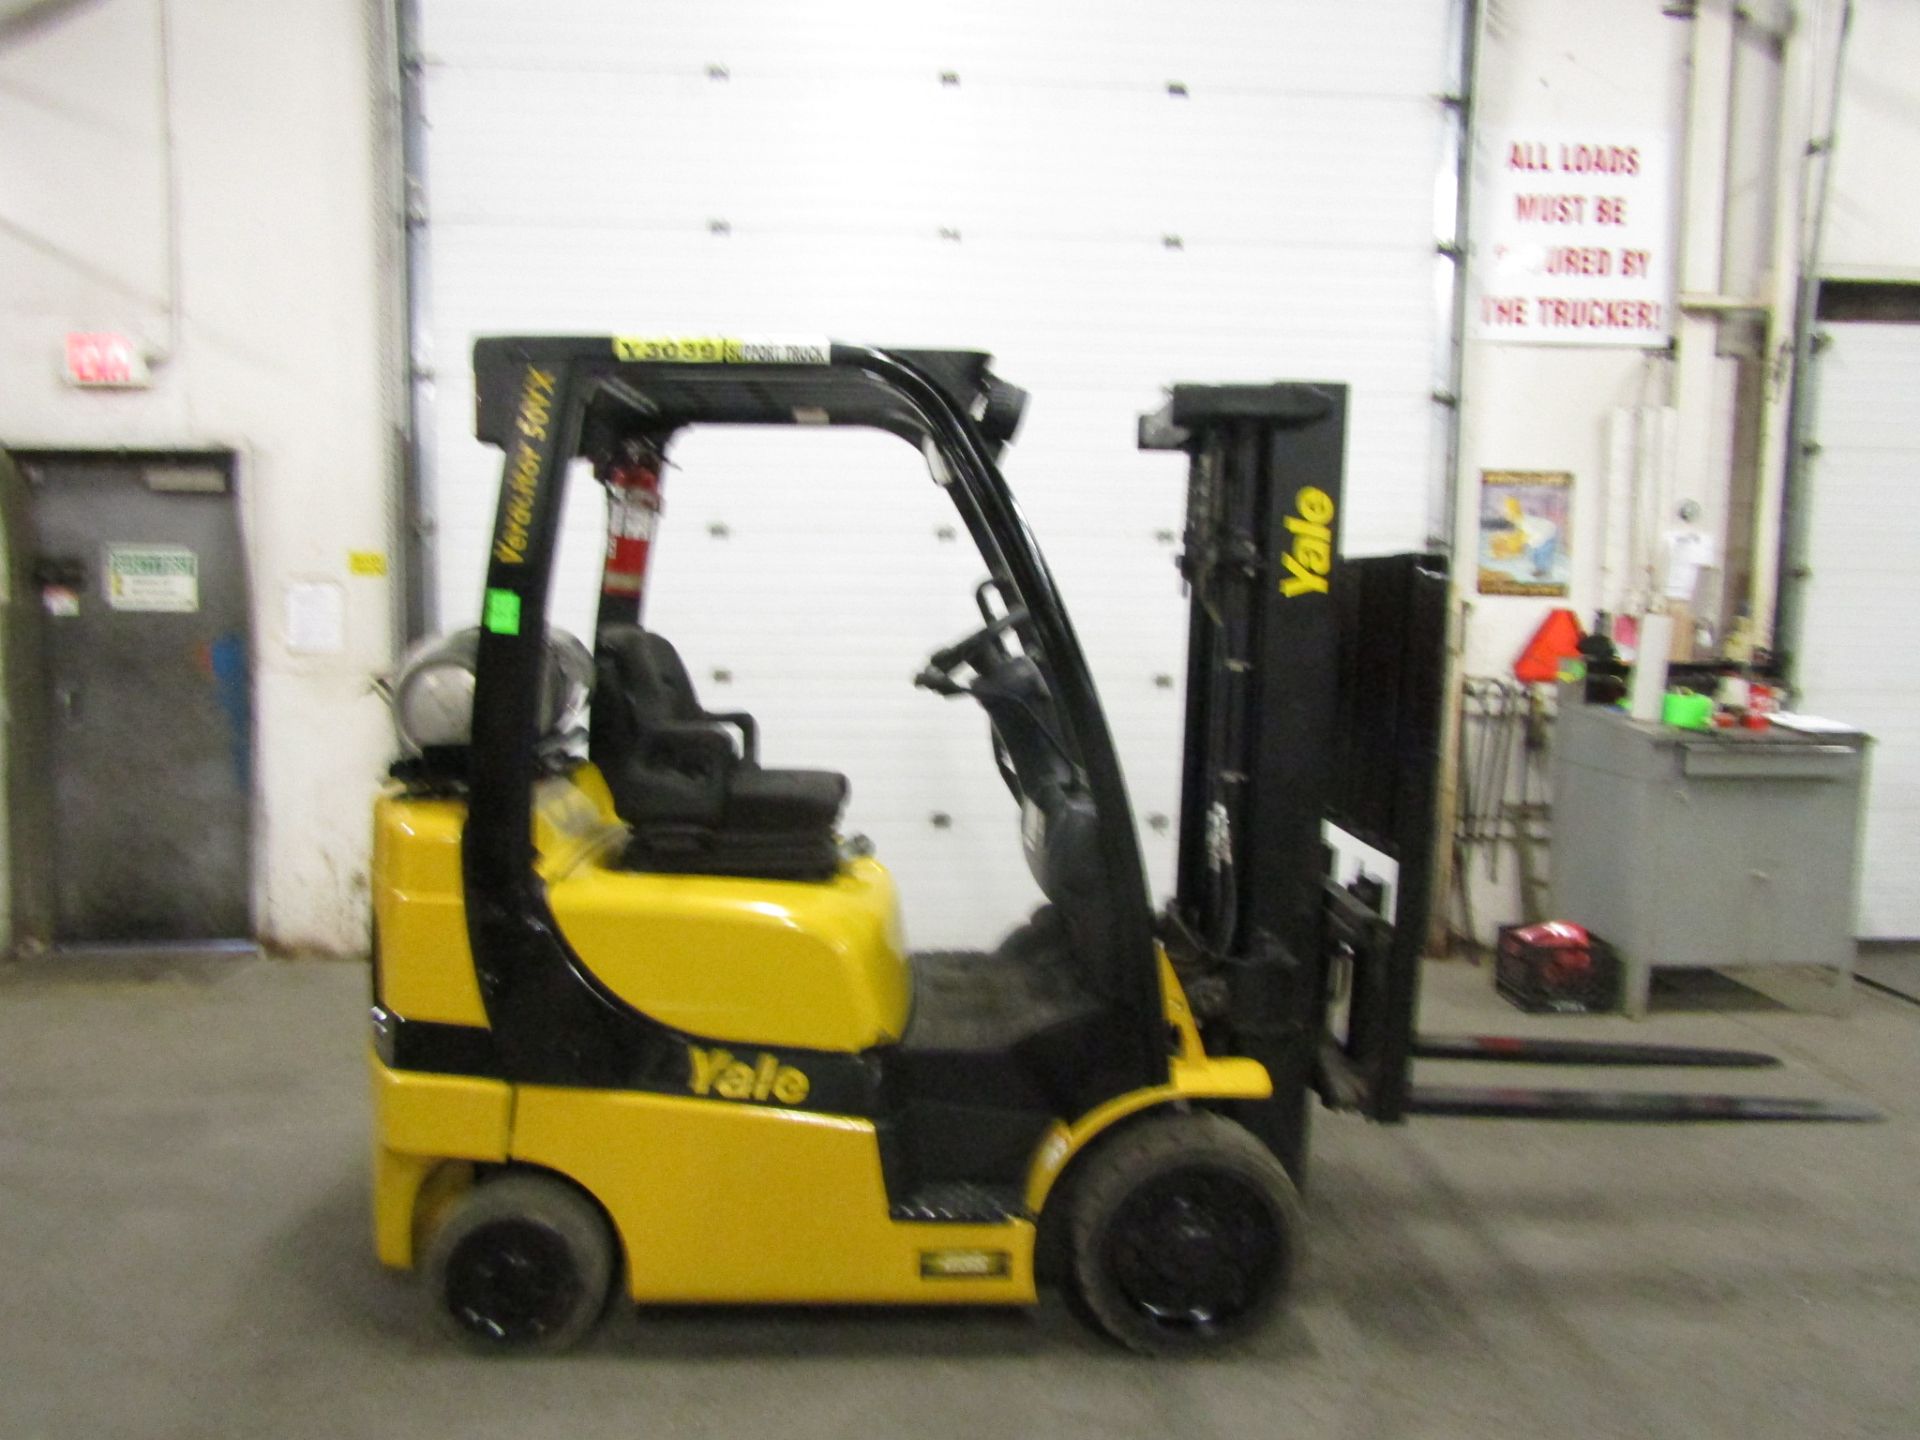 2012 Yale 5000lbs Capacity Forklift with 3-stage mast and sideshift - LPG (propane) (no propane tank - Image 2 of 2